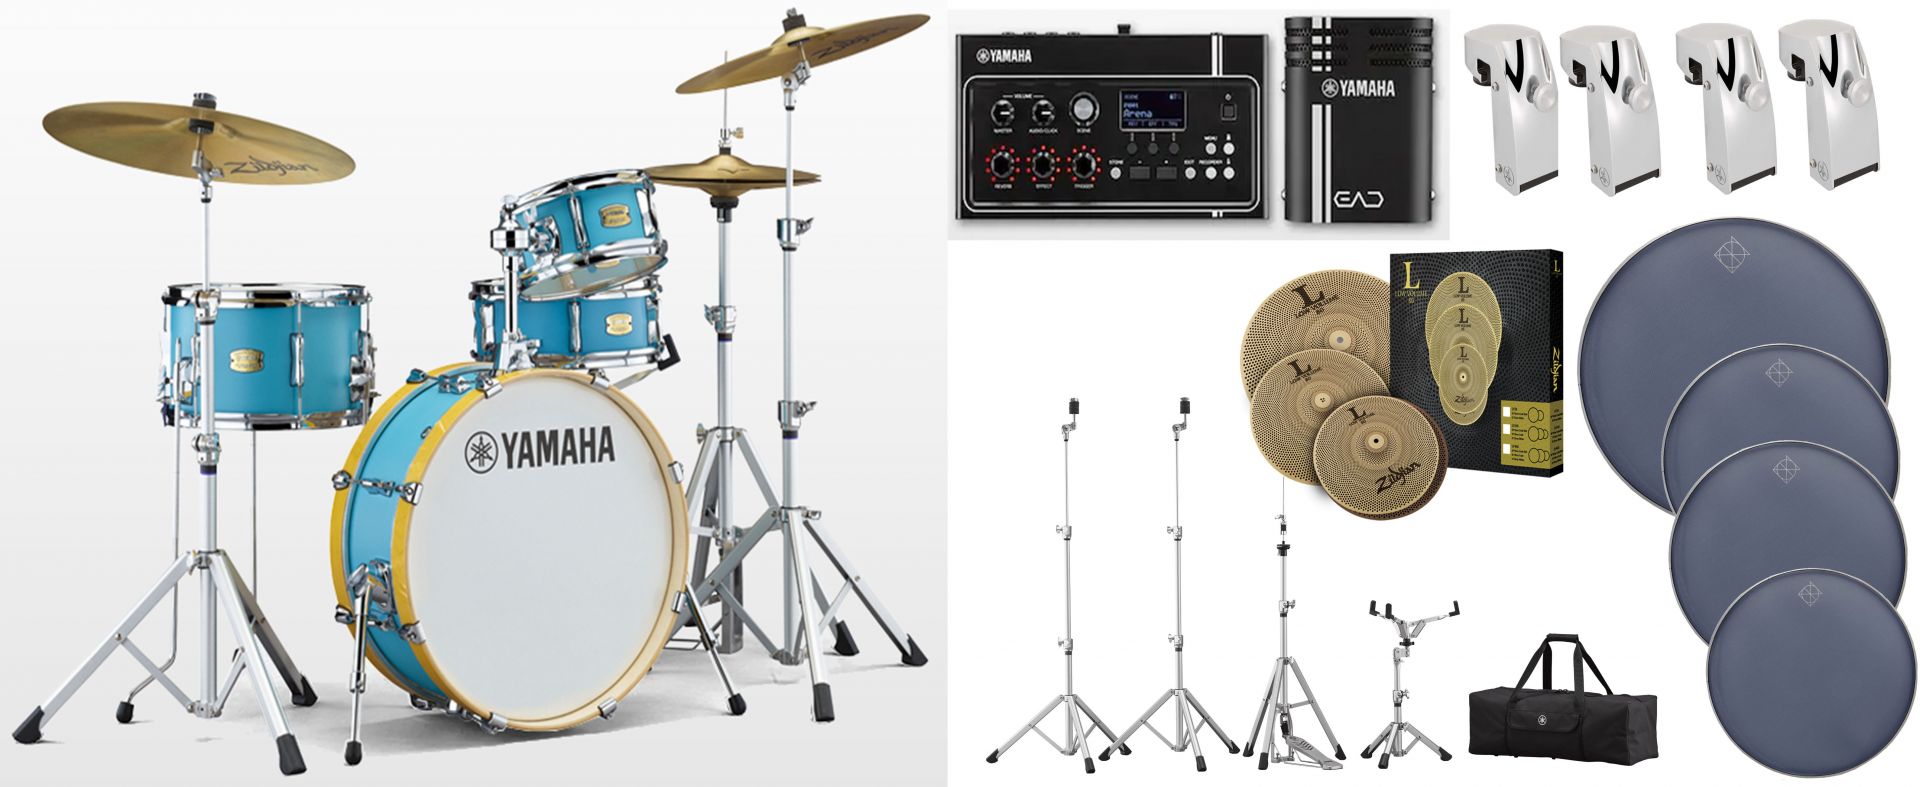 YAMAHAHYBRID DRUMS with DIXON Mesh Heads